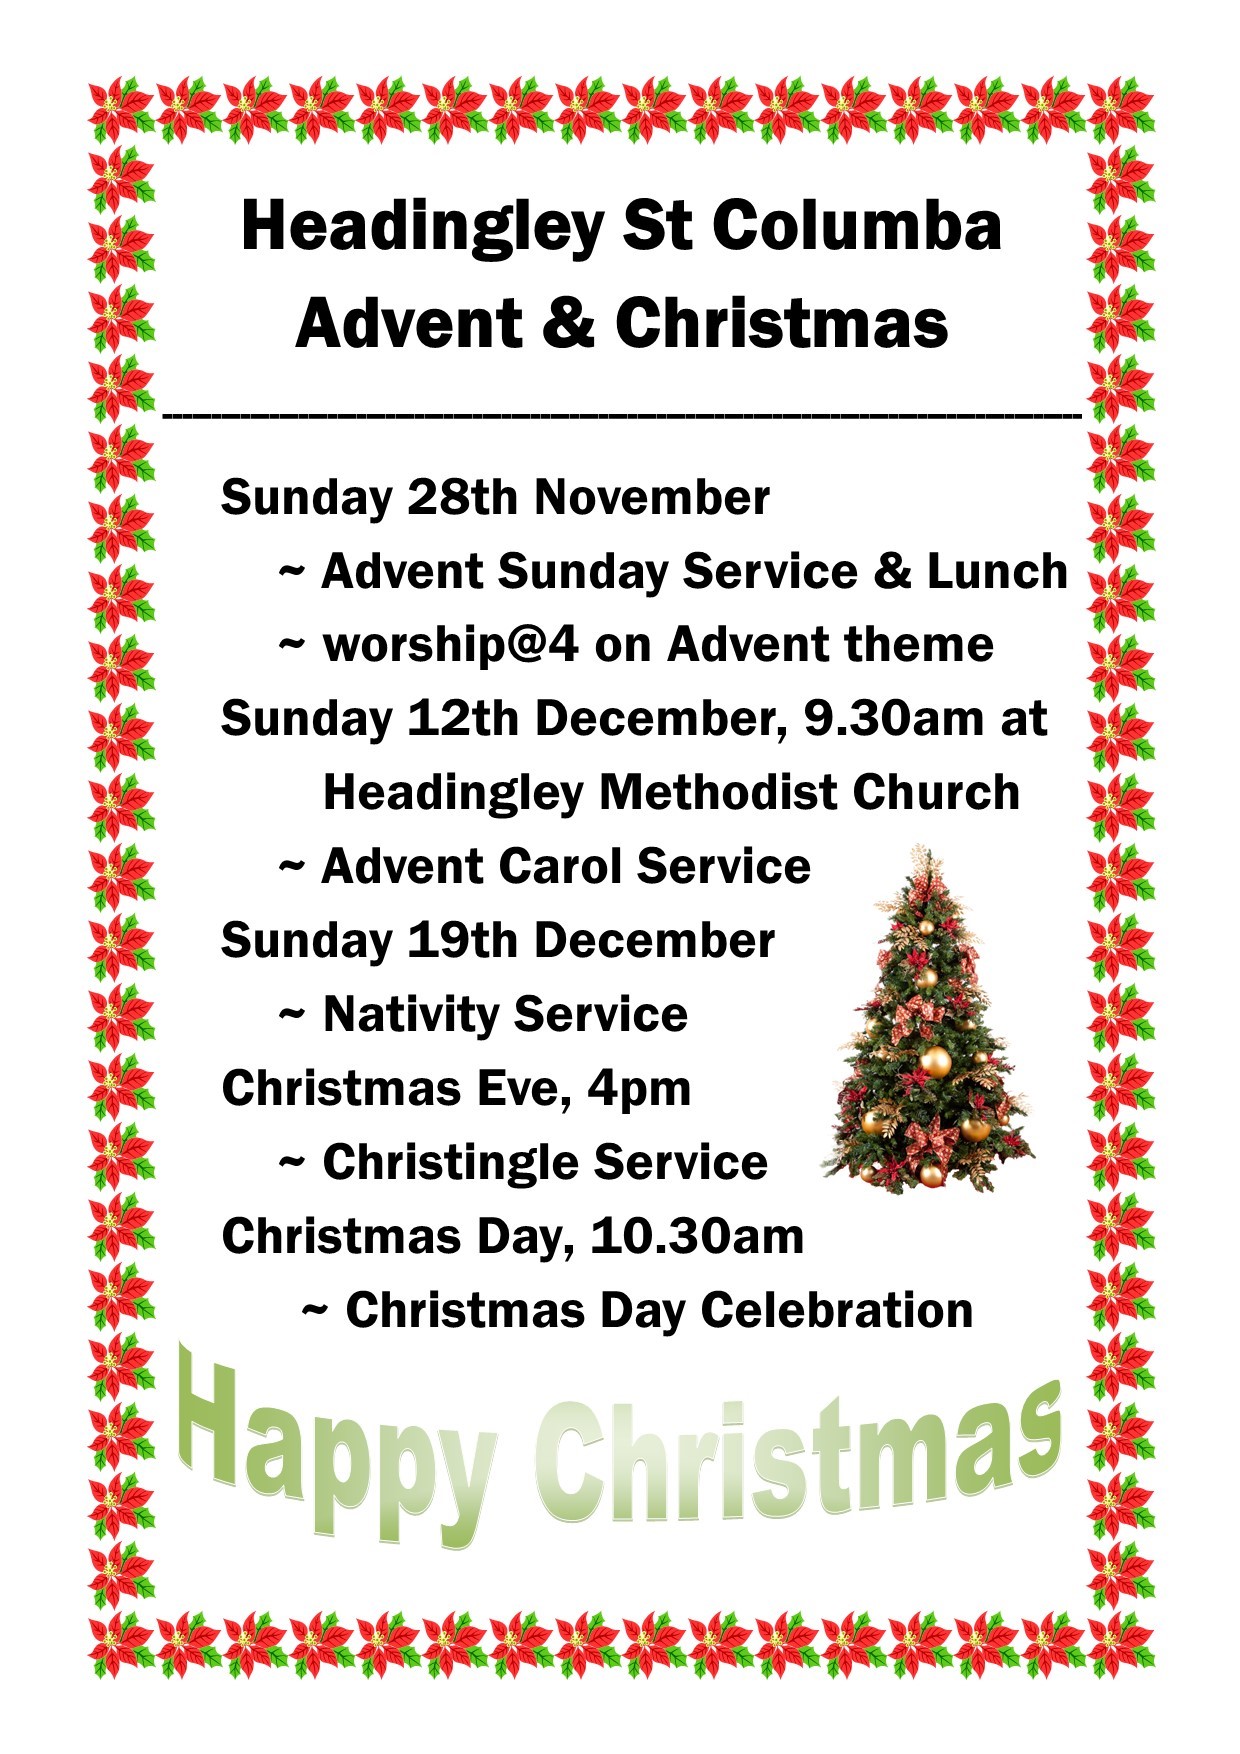 Advent and Christmas Services